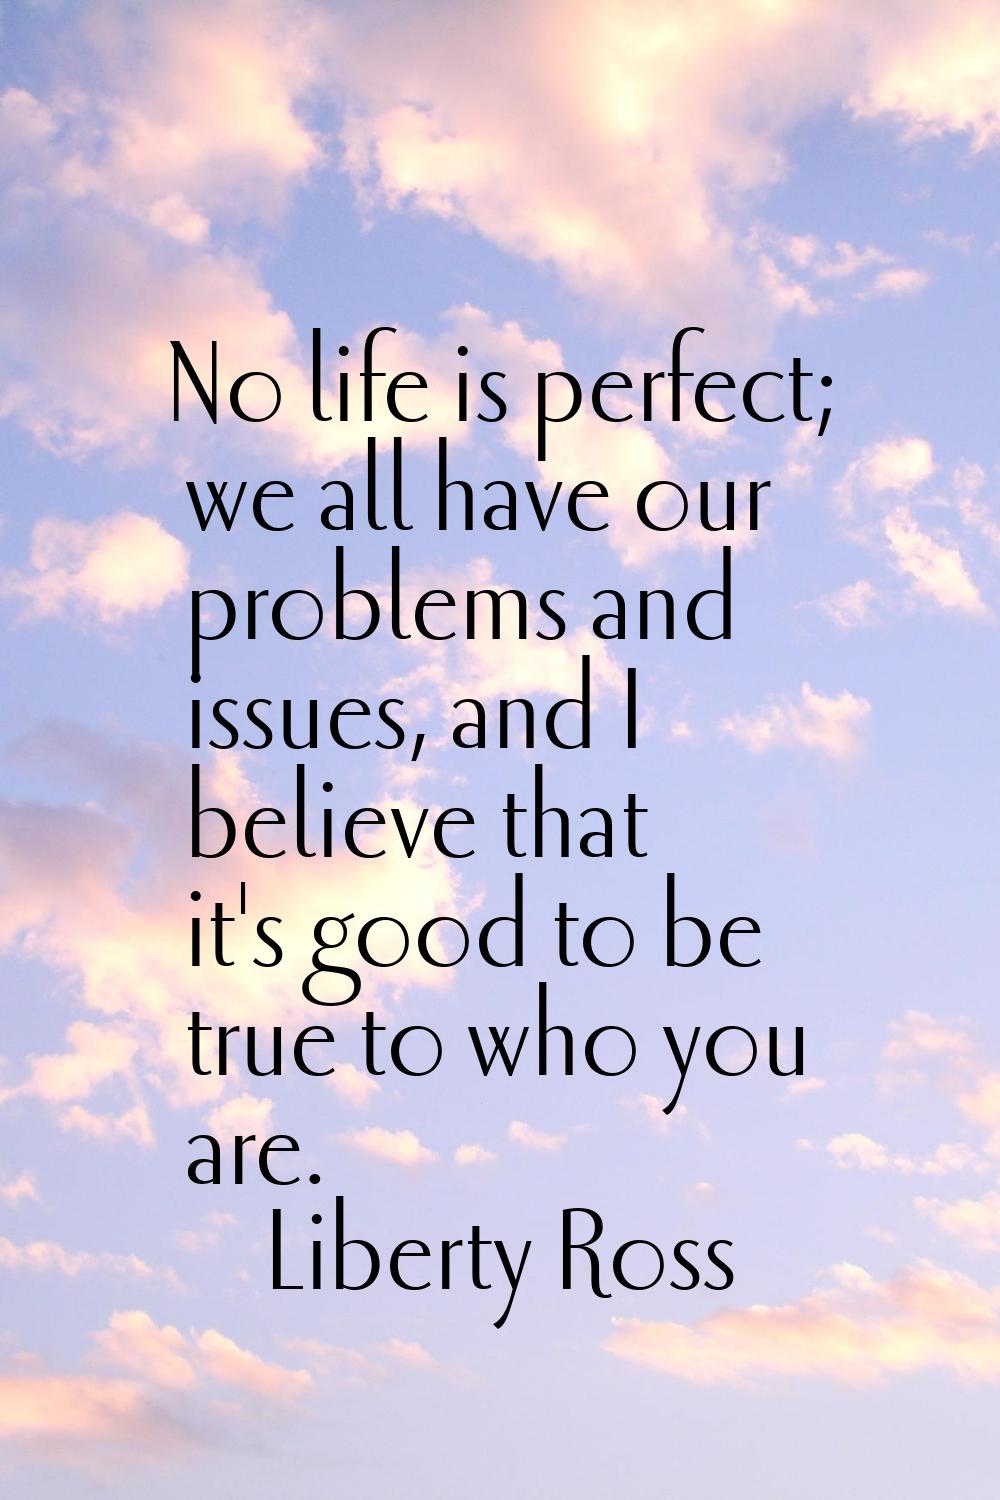 No life is perfect; we all have our problems and issues, and I believe that it's good to be true to